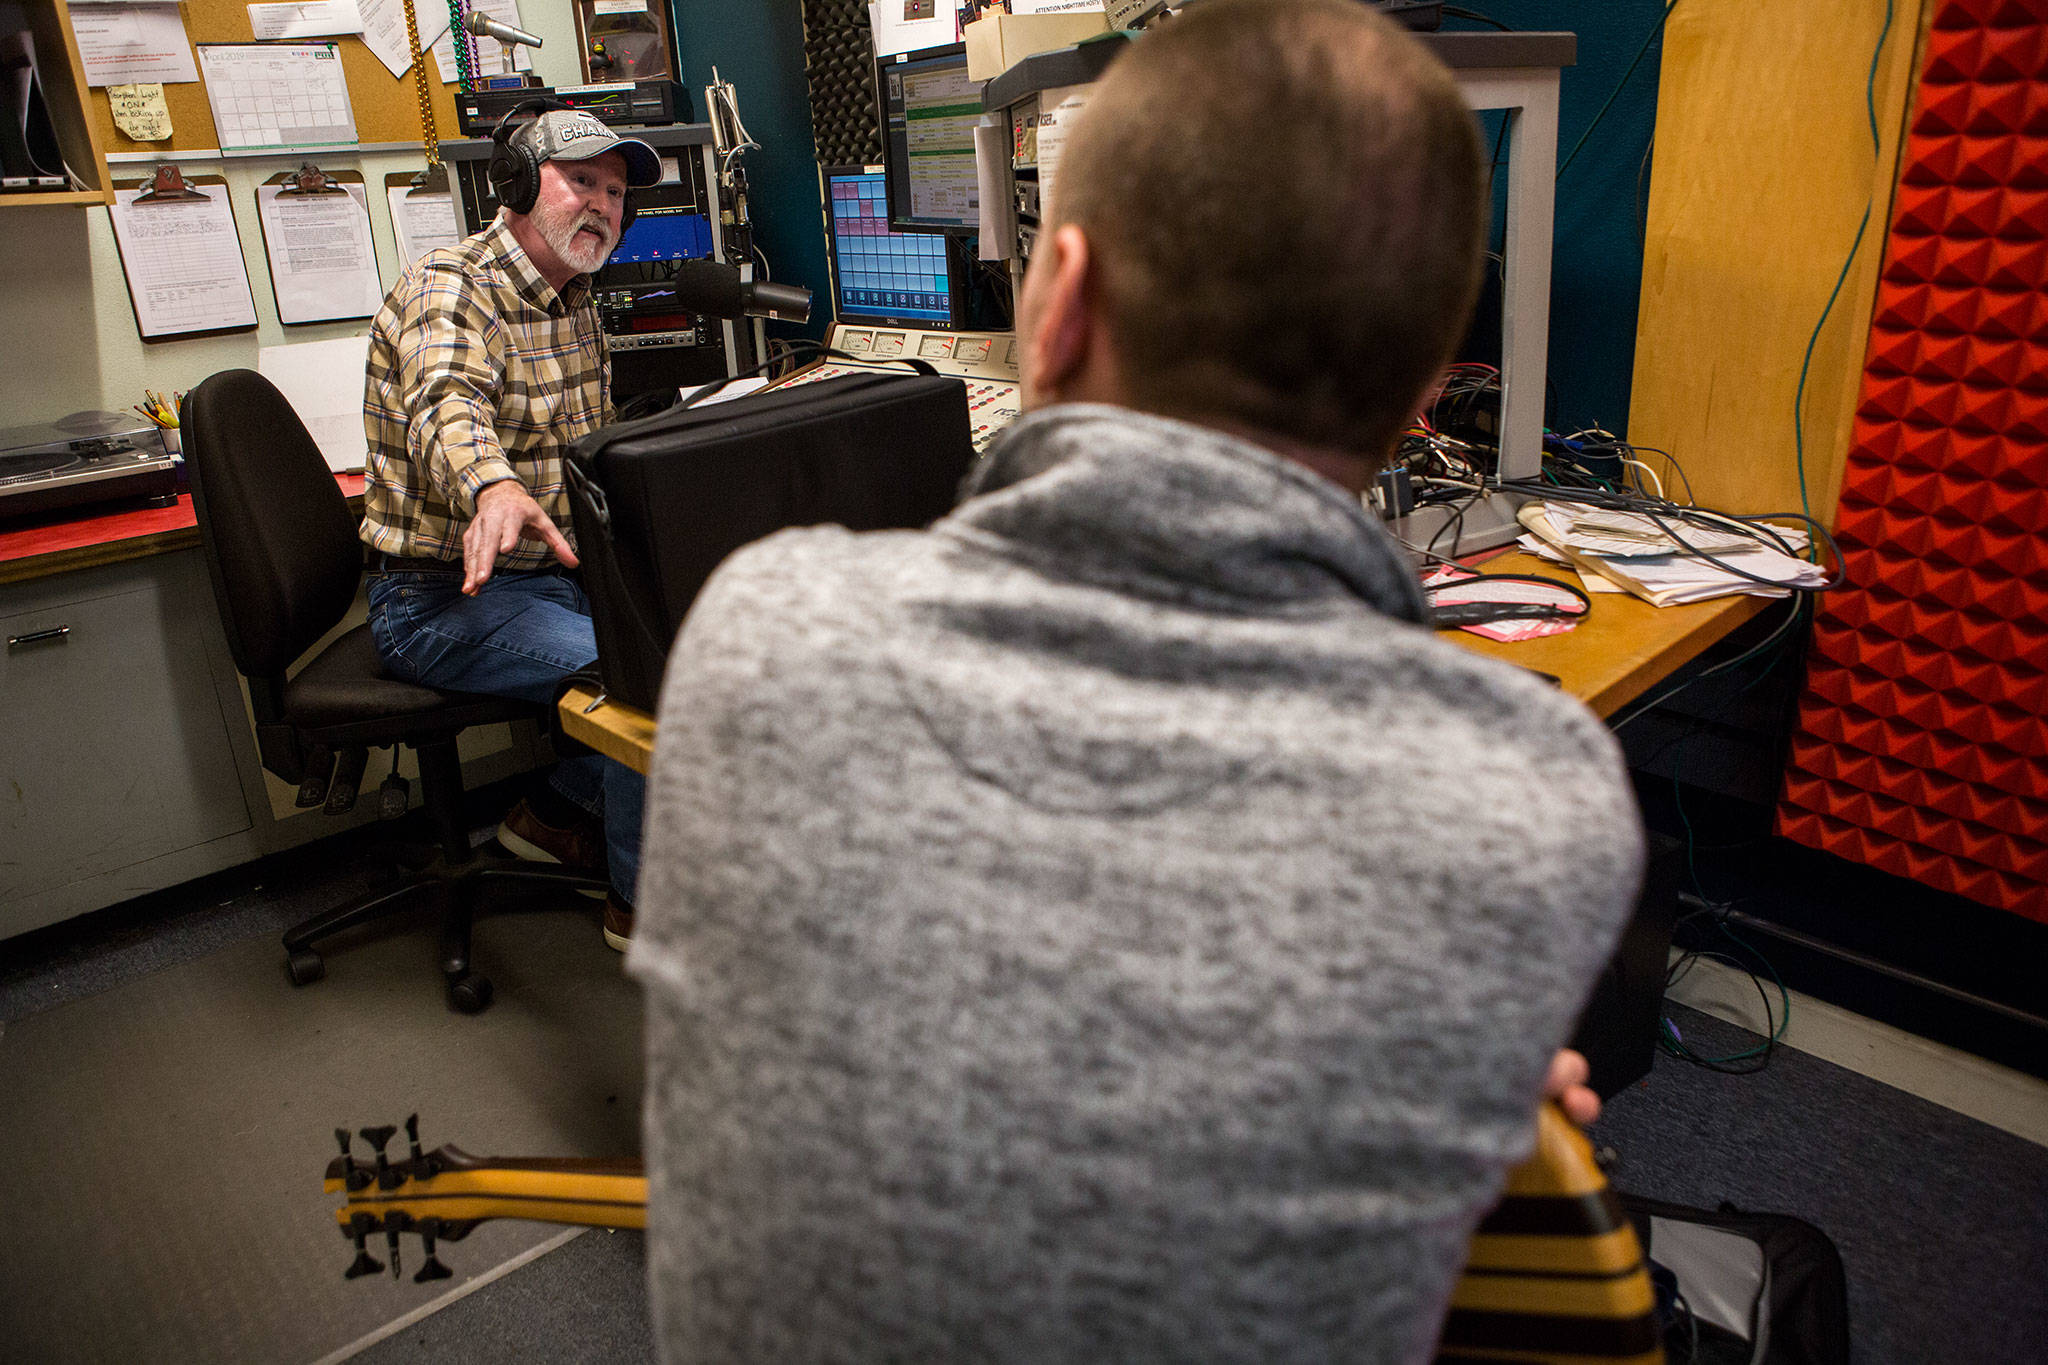 “Frettin’ Fingers” host Jim Hilmar talks with bass player Brendan Wires during his show at the KSER-FM studio. (Olivia Vanni / The Herald)